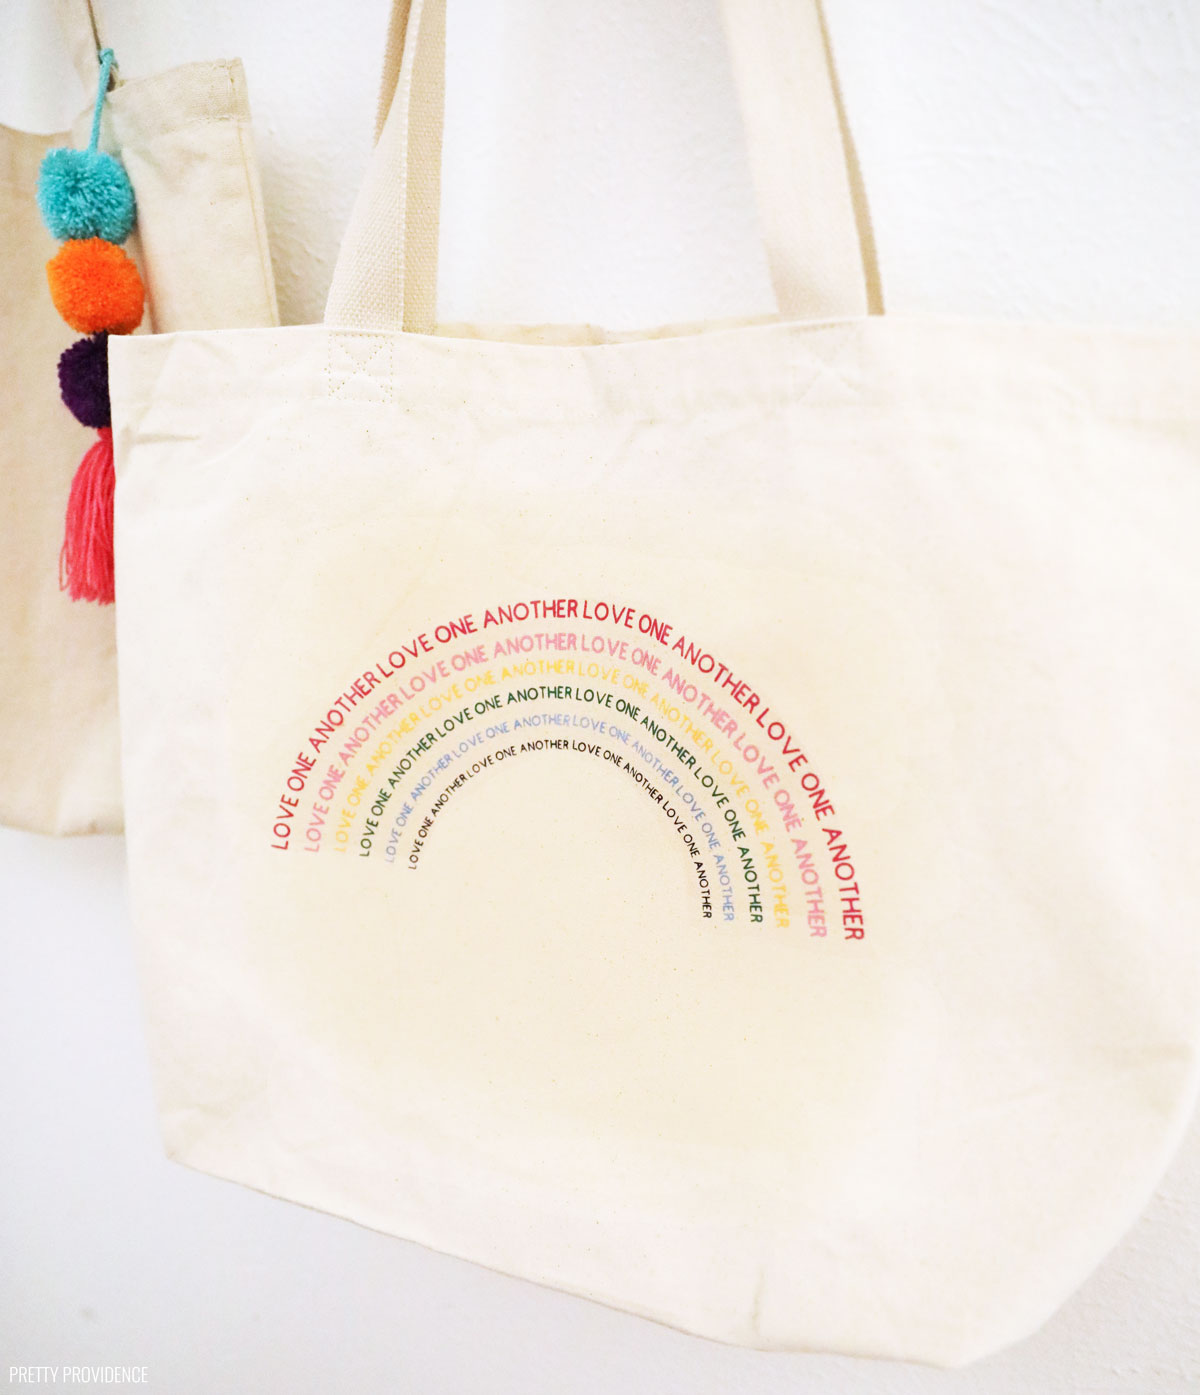 love one another words forming a rainbow on a tote bag hanging up against a white wall